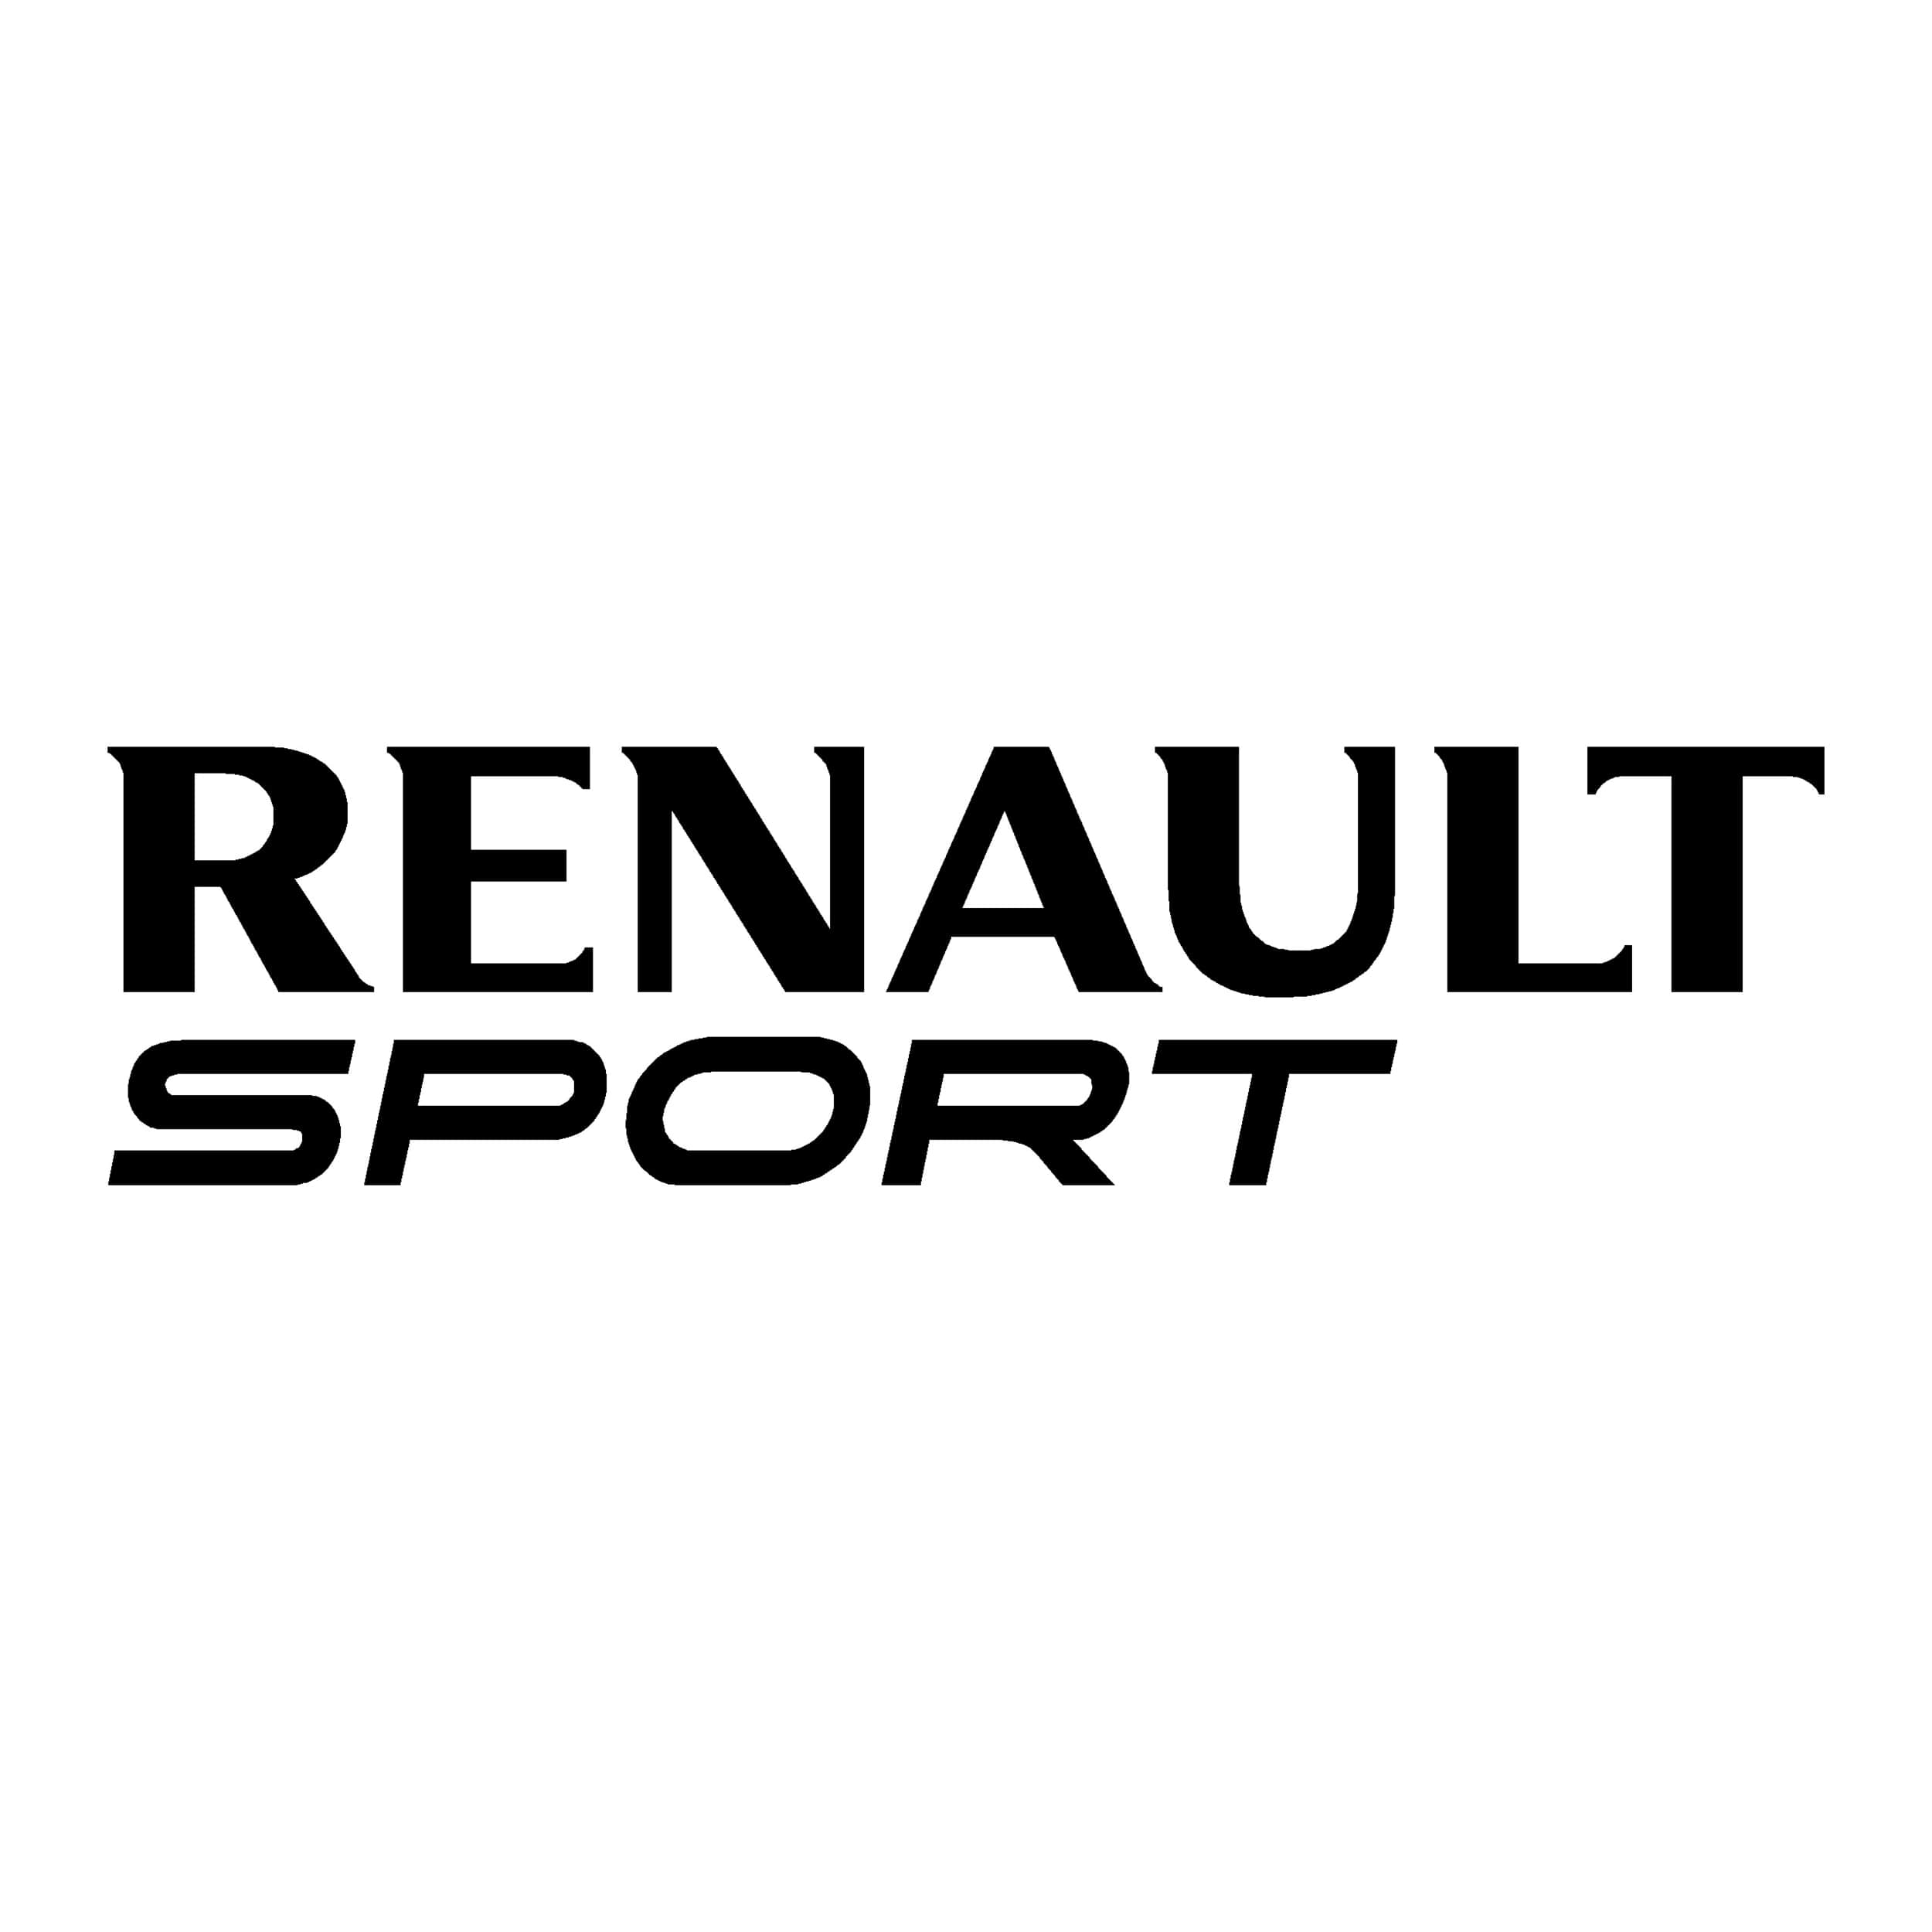 stickers-ref-4-renault-sport-voiture-tuning-competition-deco-adhesive-auto-racing-rallye-min